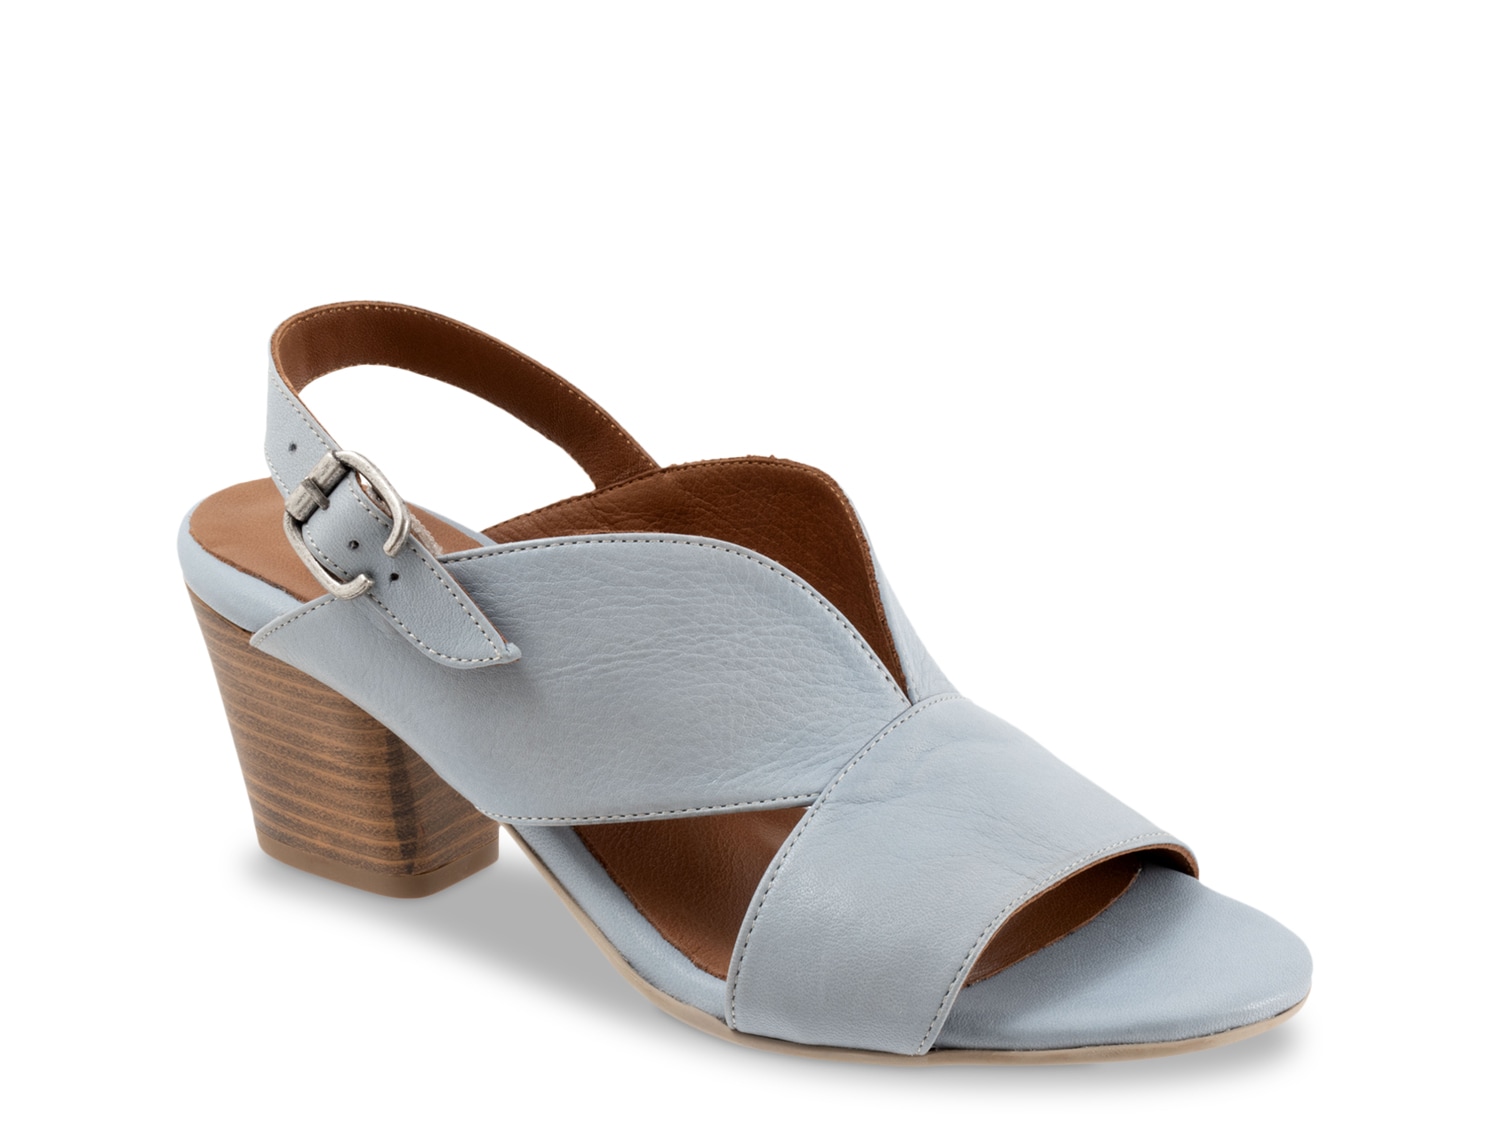 Bueno Candy Sandal - Free Shipping | DSW